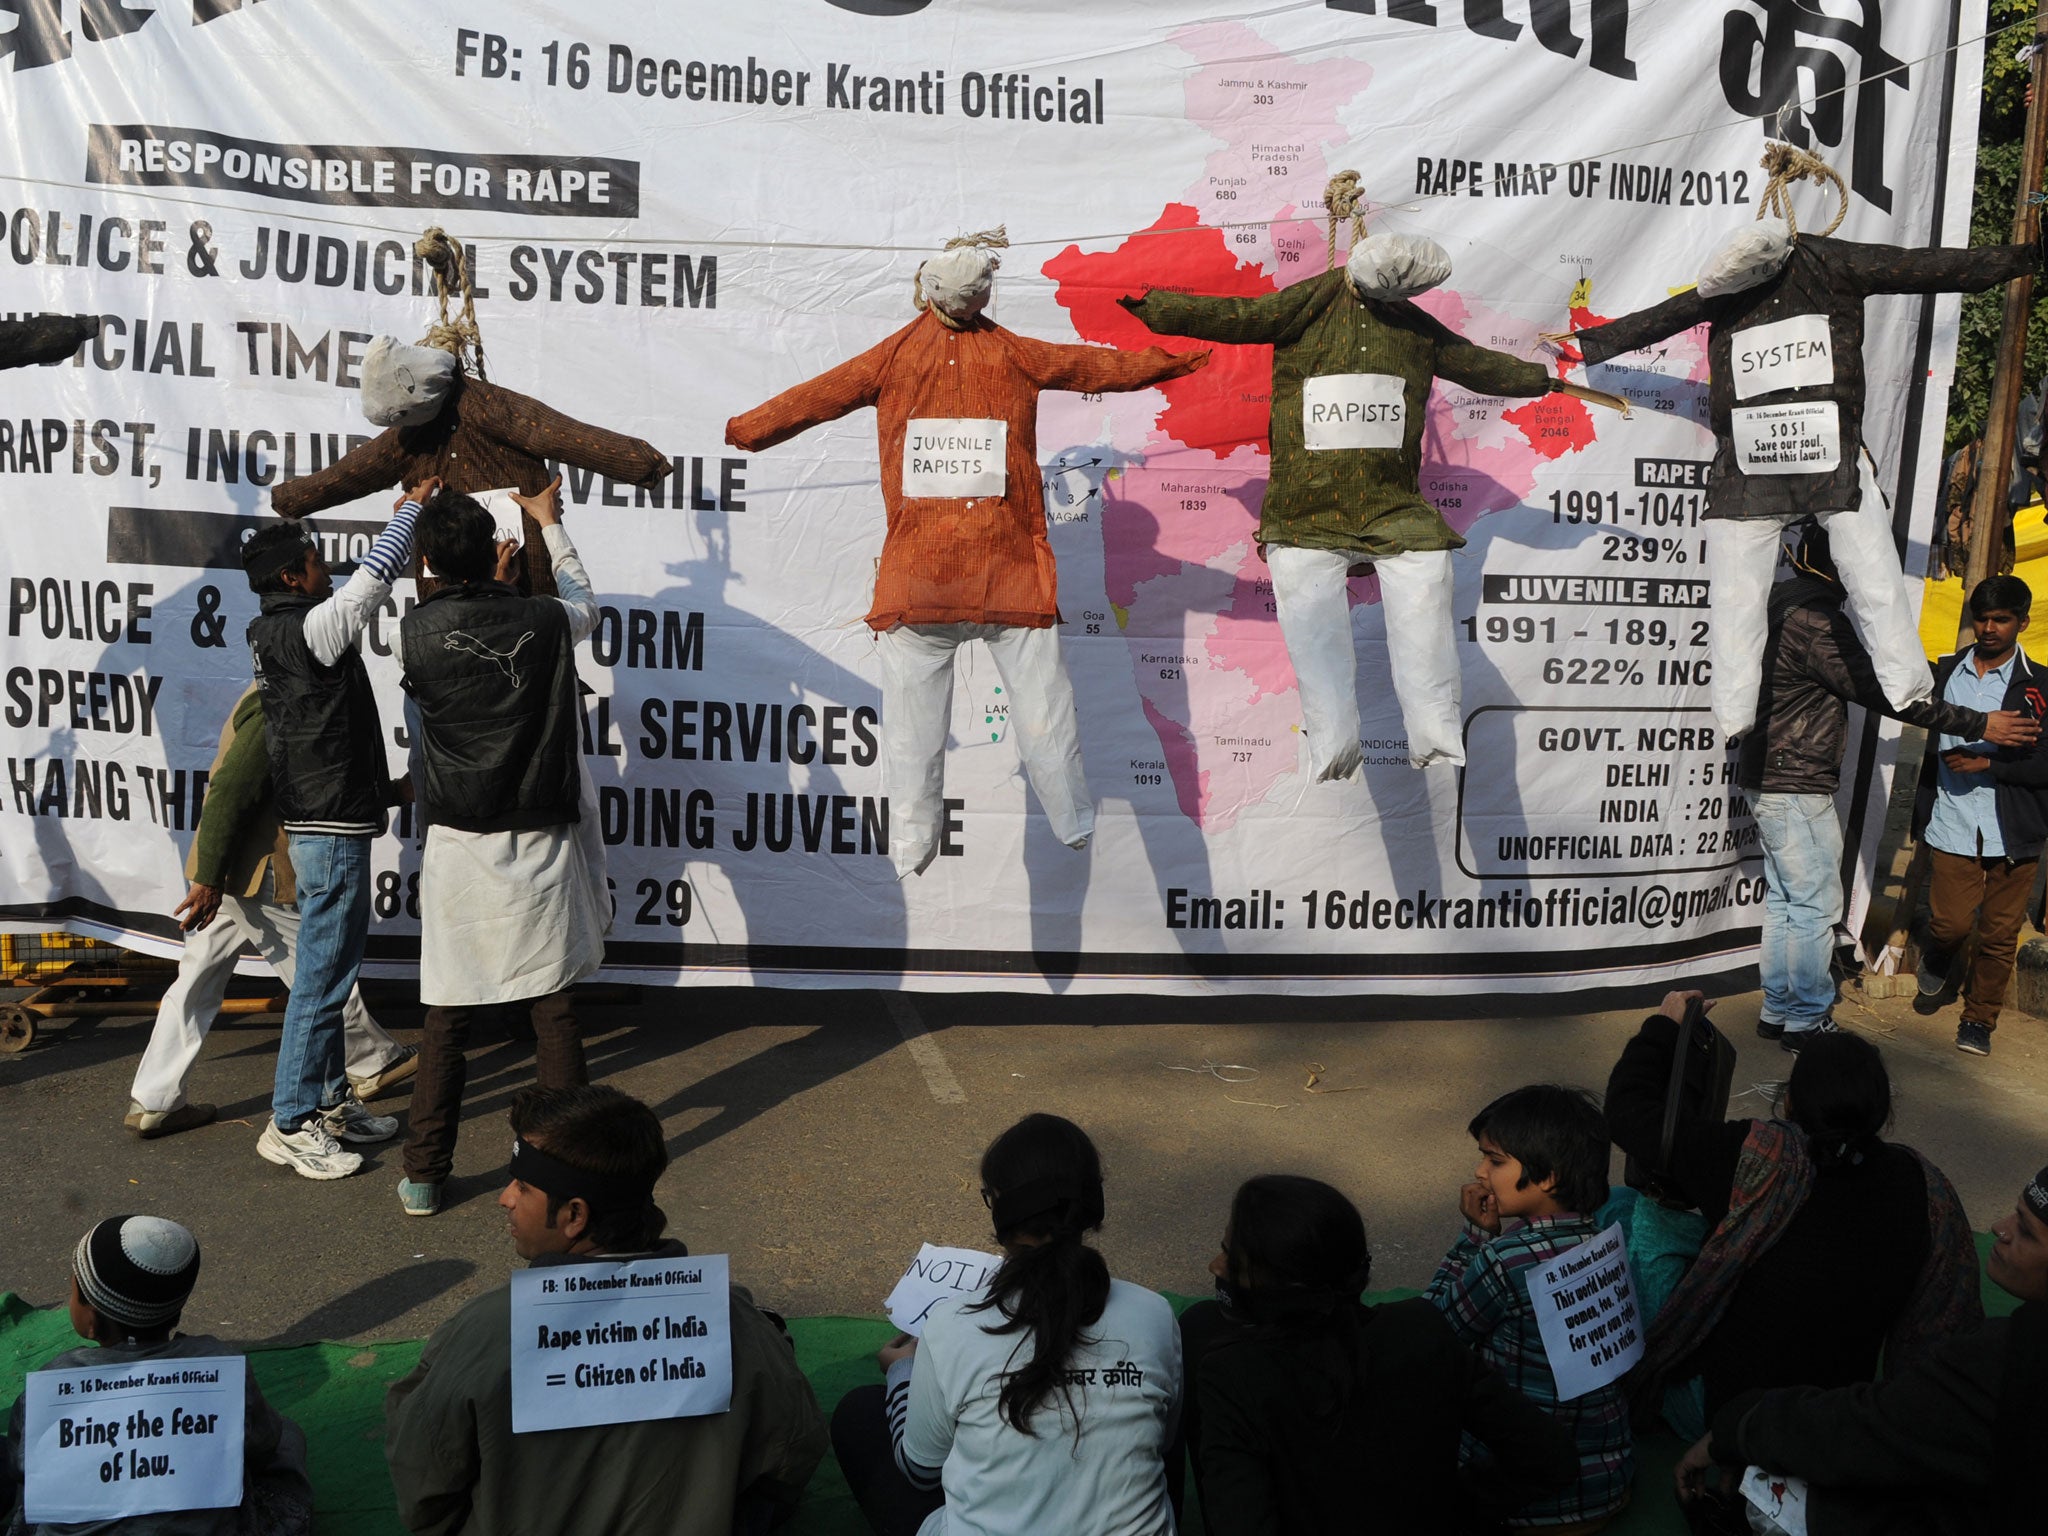 Demonstrators gather near effigies representing the convicted rapists during a protest in New Delhi in December 2013